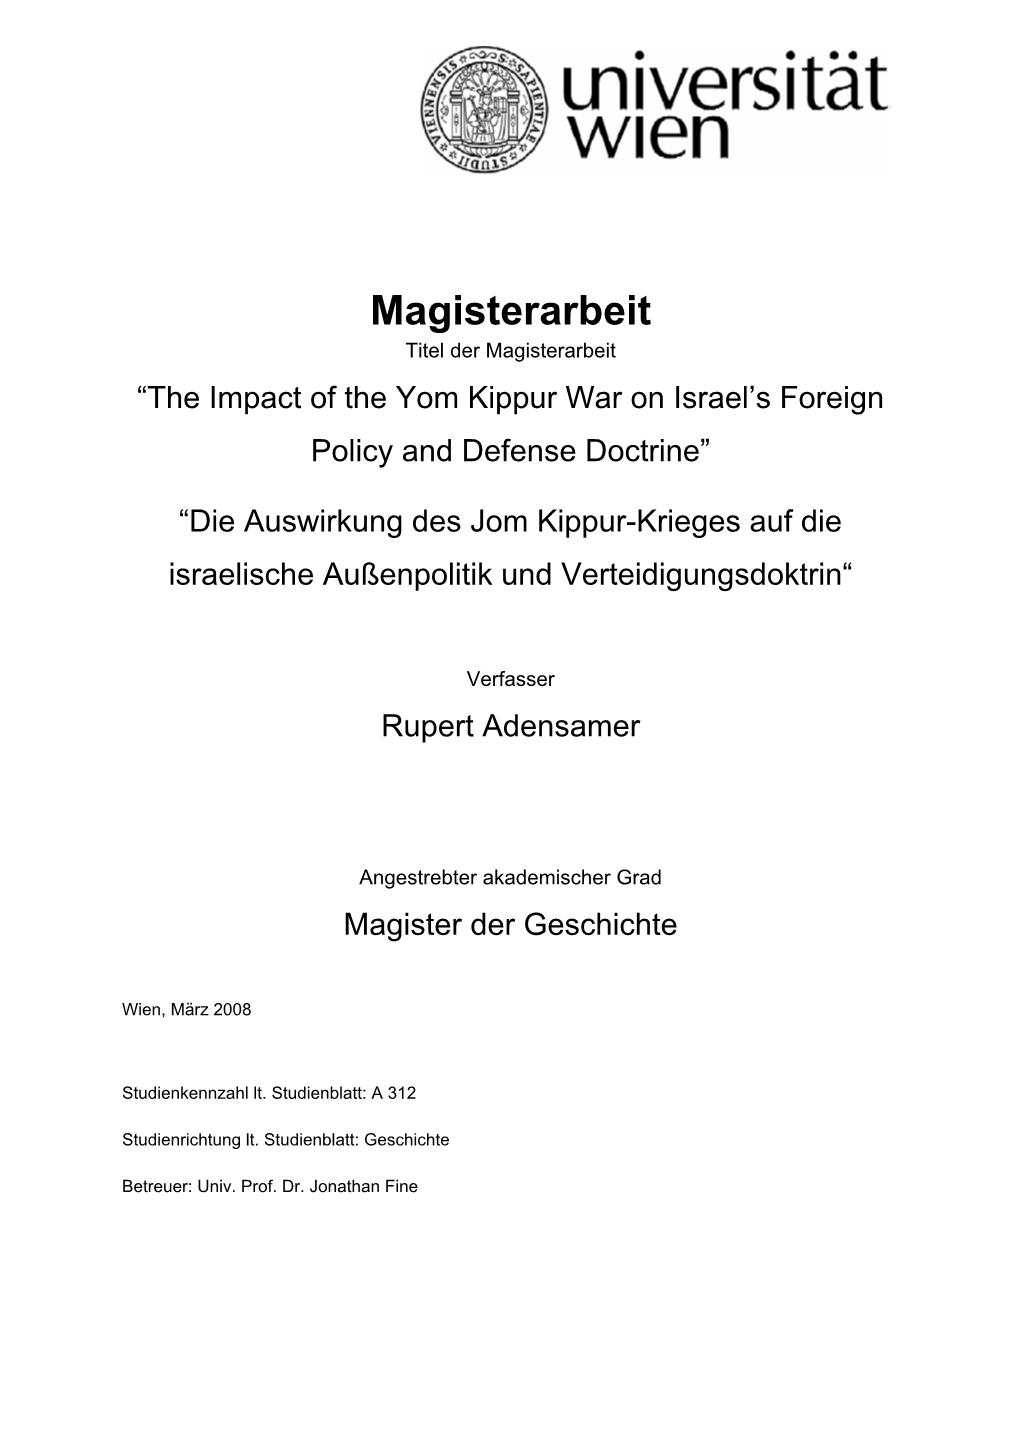 Magisterarbeit Titel Der Magisterarbeit “The Impact of the Yom Kippur War on Israel’S Foreign Policy and Defense Doctrine”